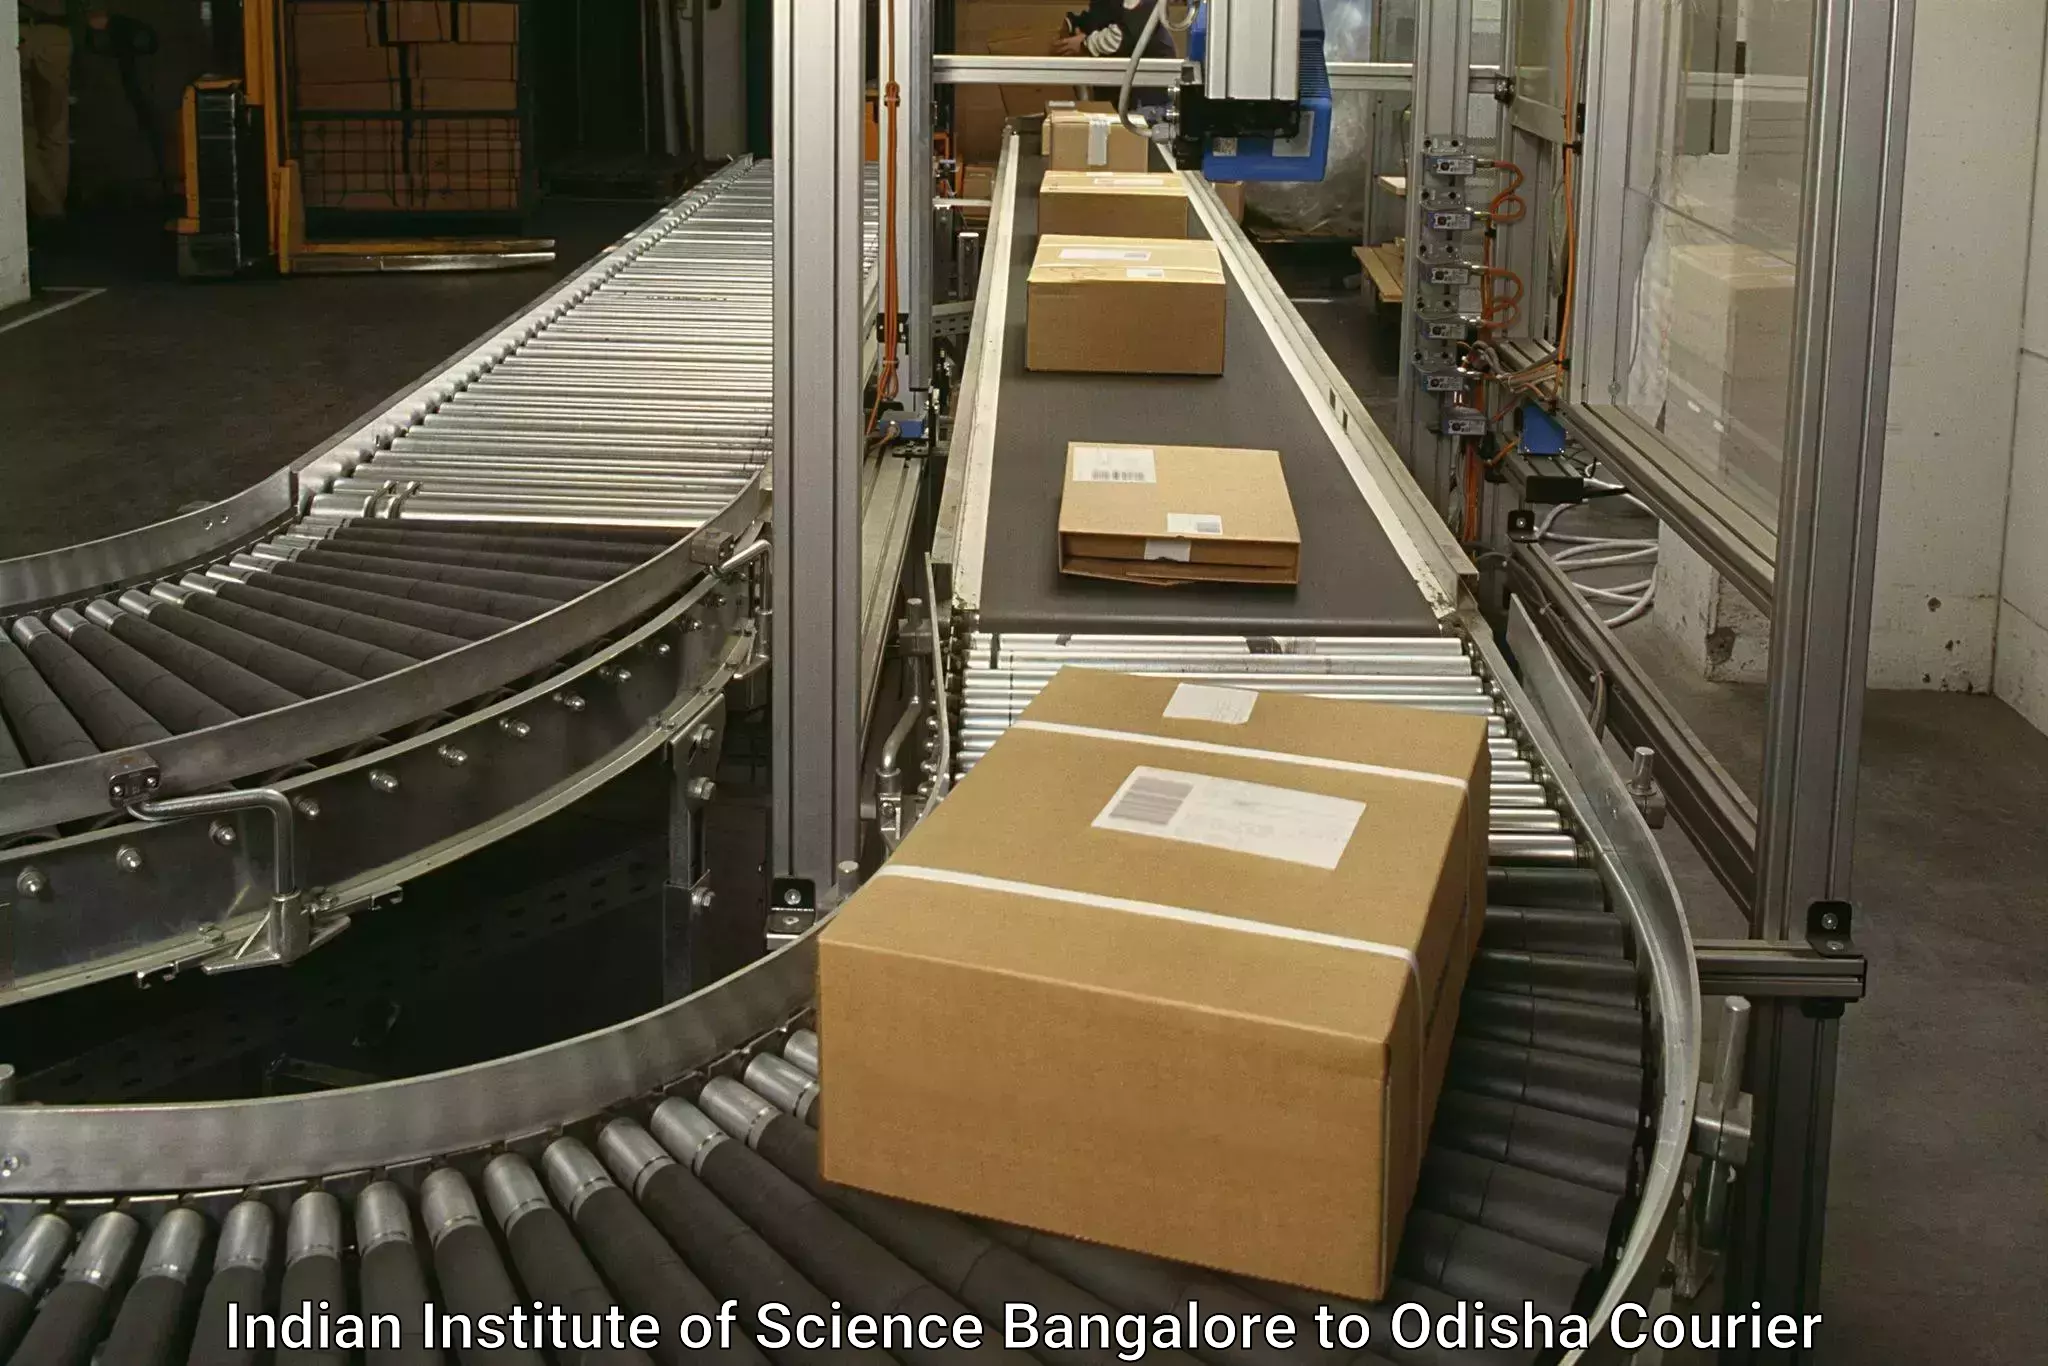 Seamless shipping service Indian Institute of Science Bangalore to Kalinga Institute of Industrial Technology Bhubaneswar